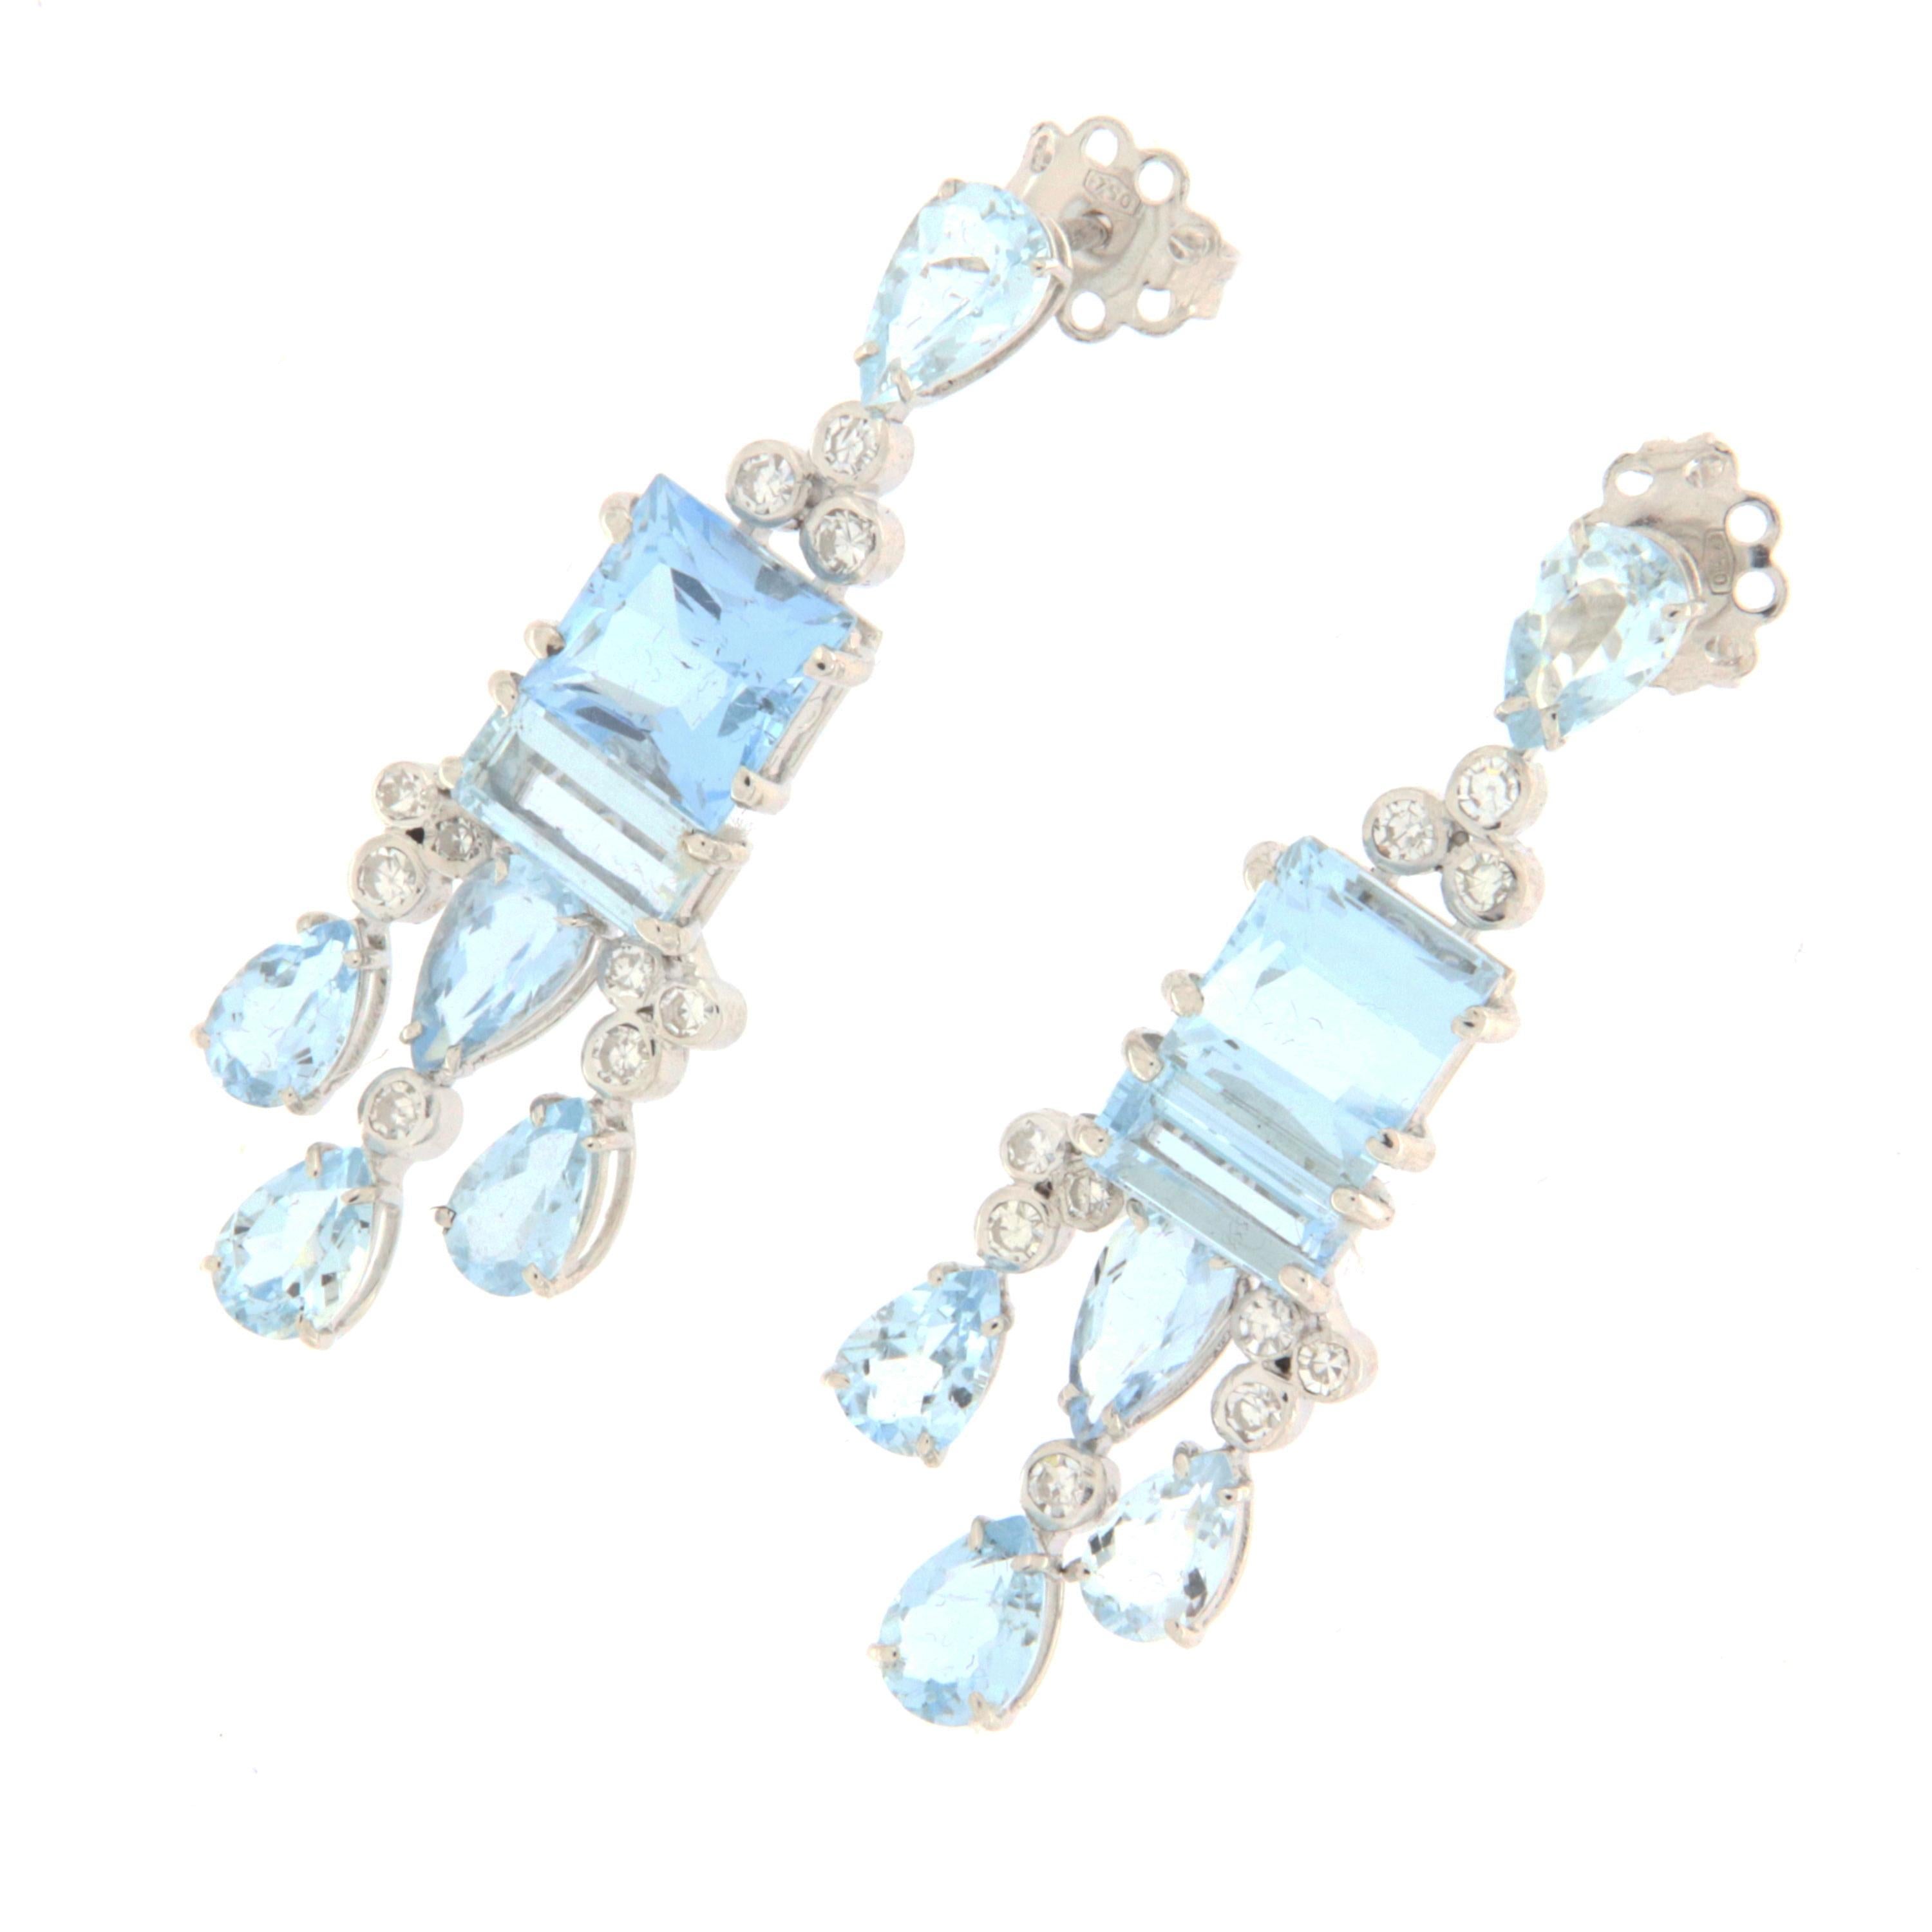 Delightful earring made entirely by hand by expert Neapolitan goldsmiths in 18-karat white gold. aquamarine of Brazilian origin are supported by diamonds.
A splendid delicate jewel that cannot be missing from a woman's collection, which can be